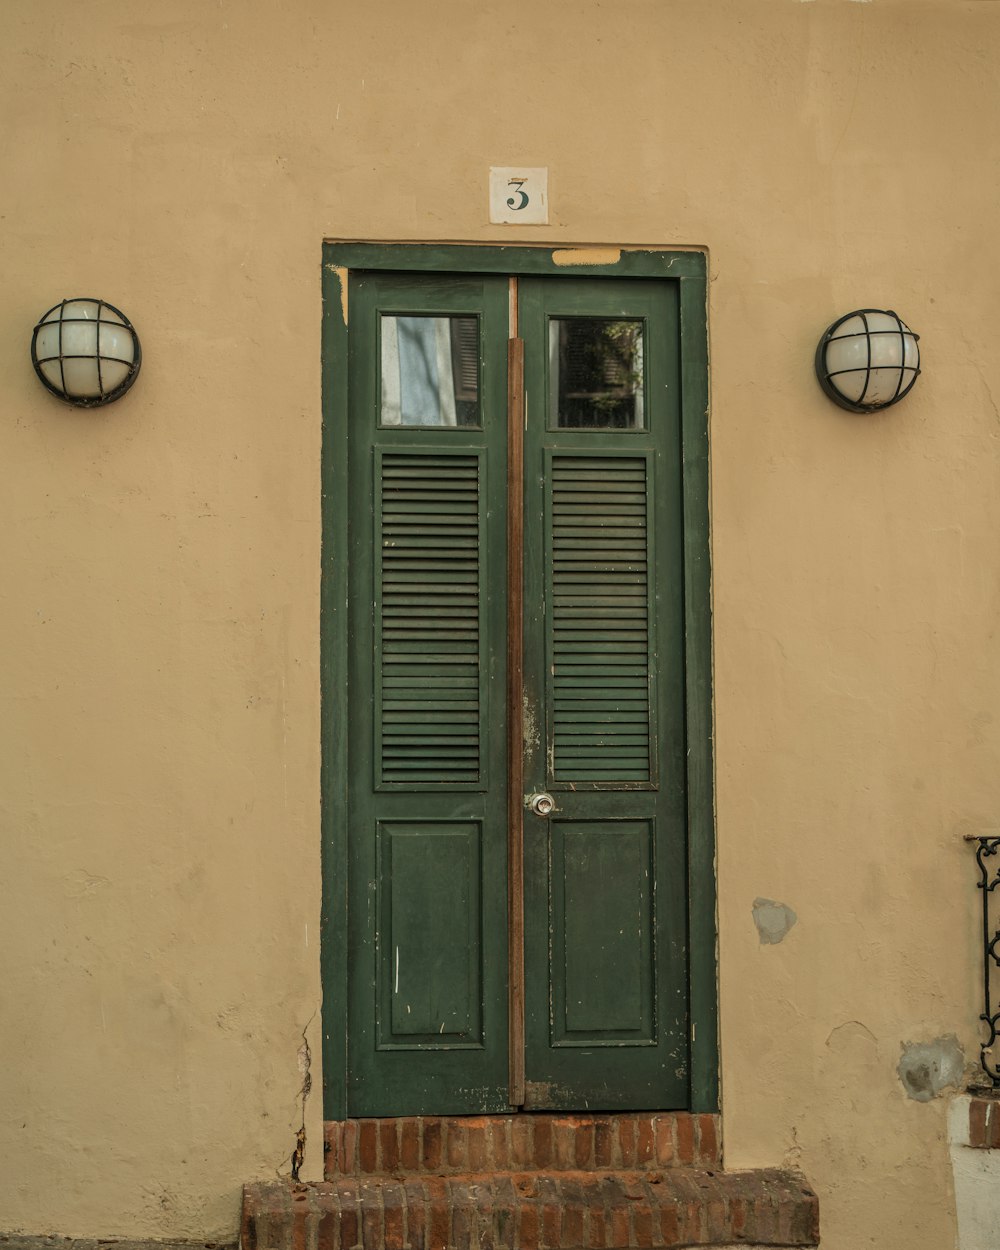 a green door with a number on it